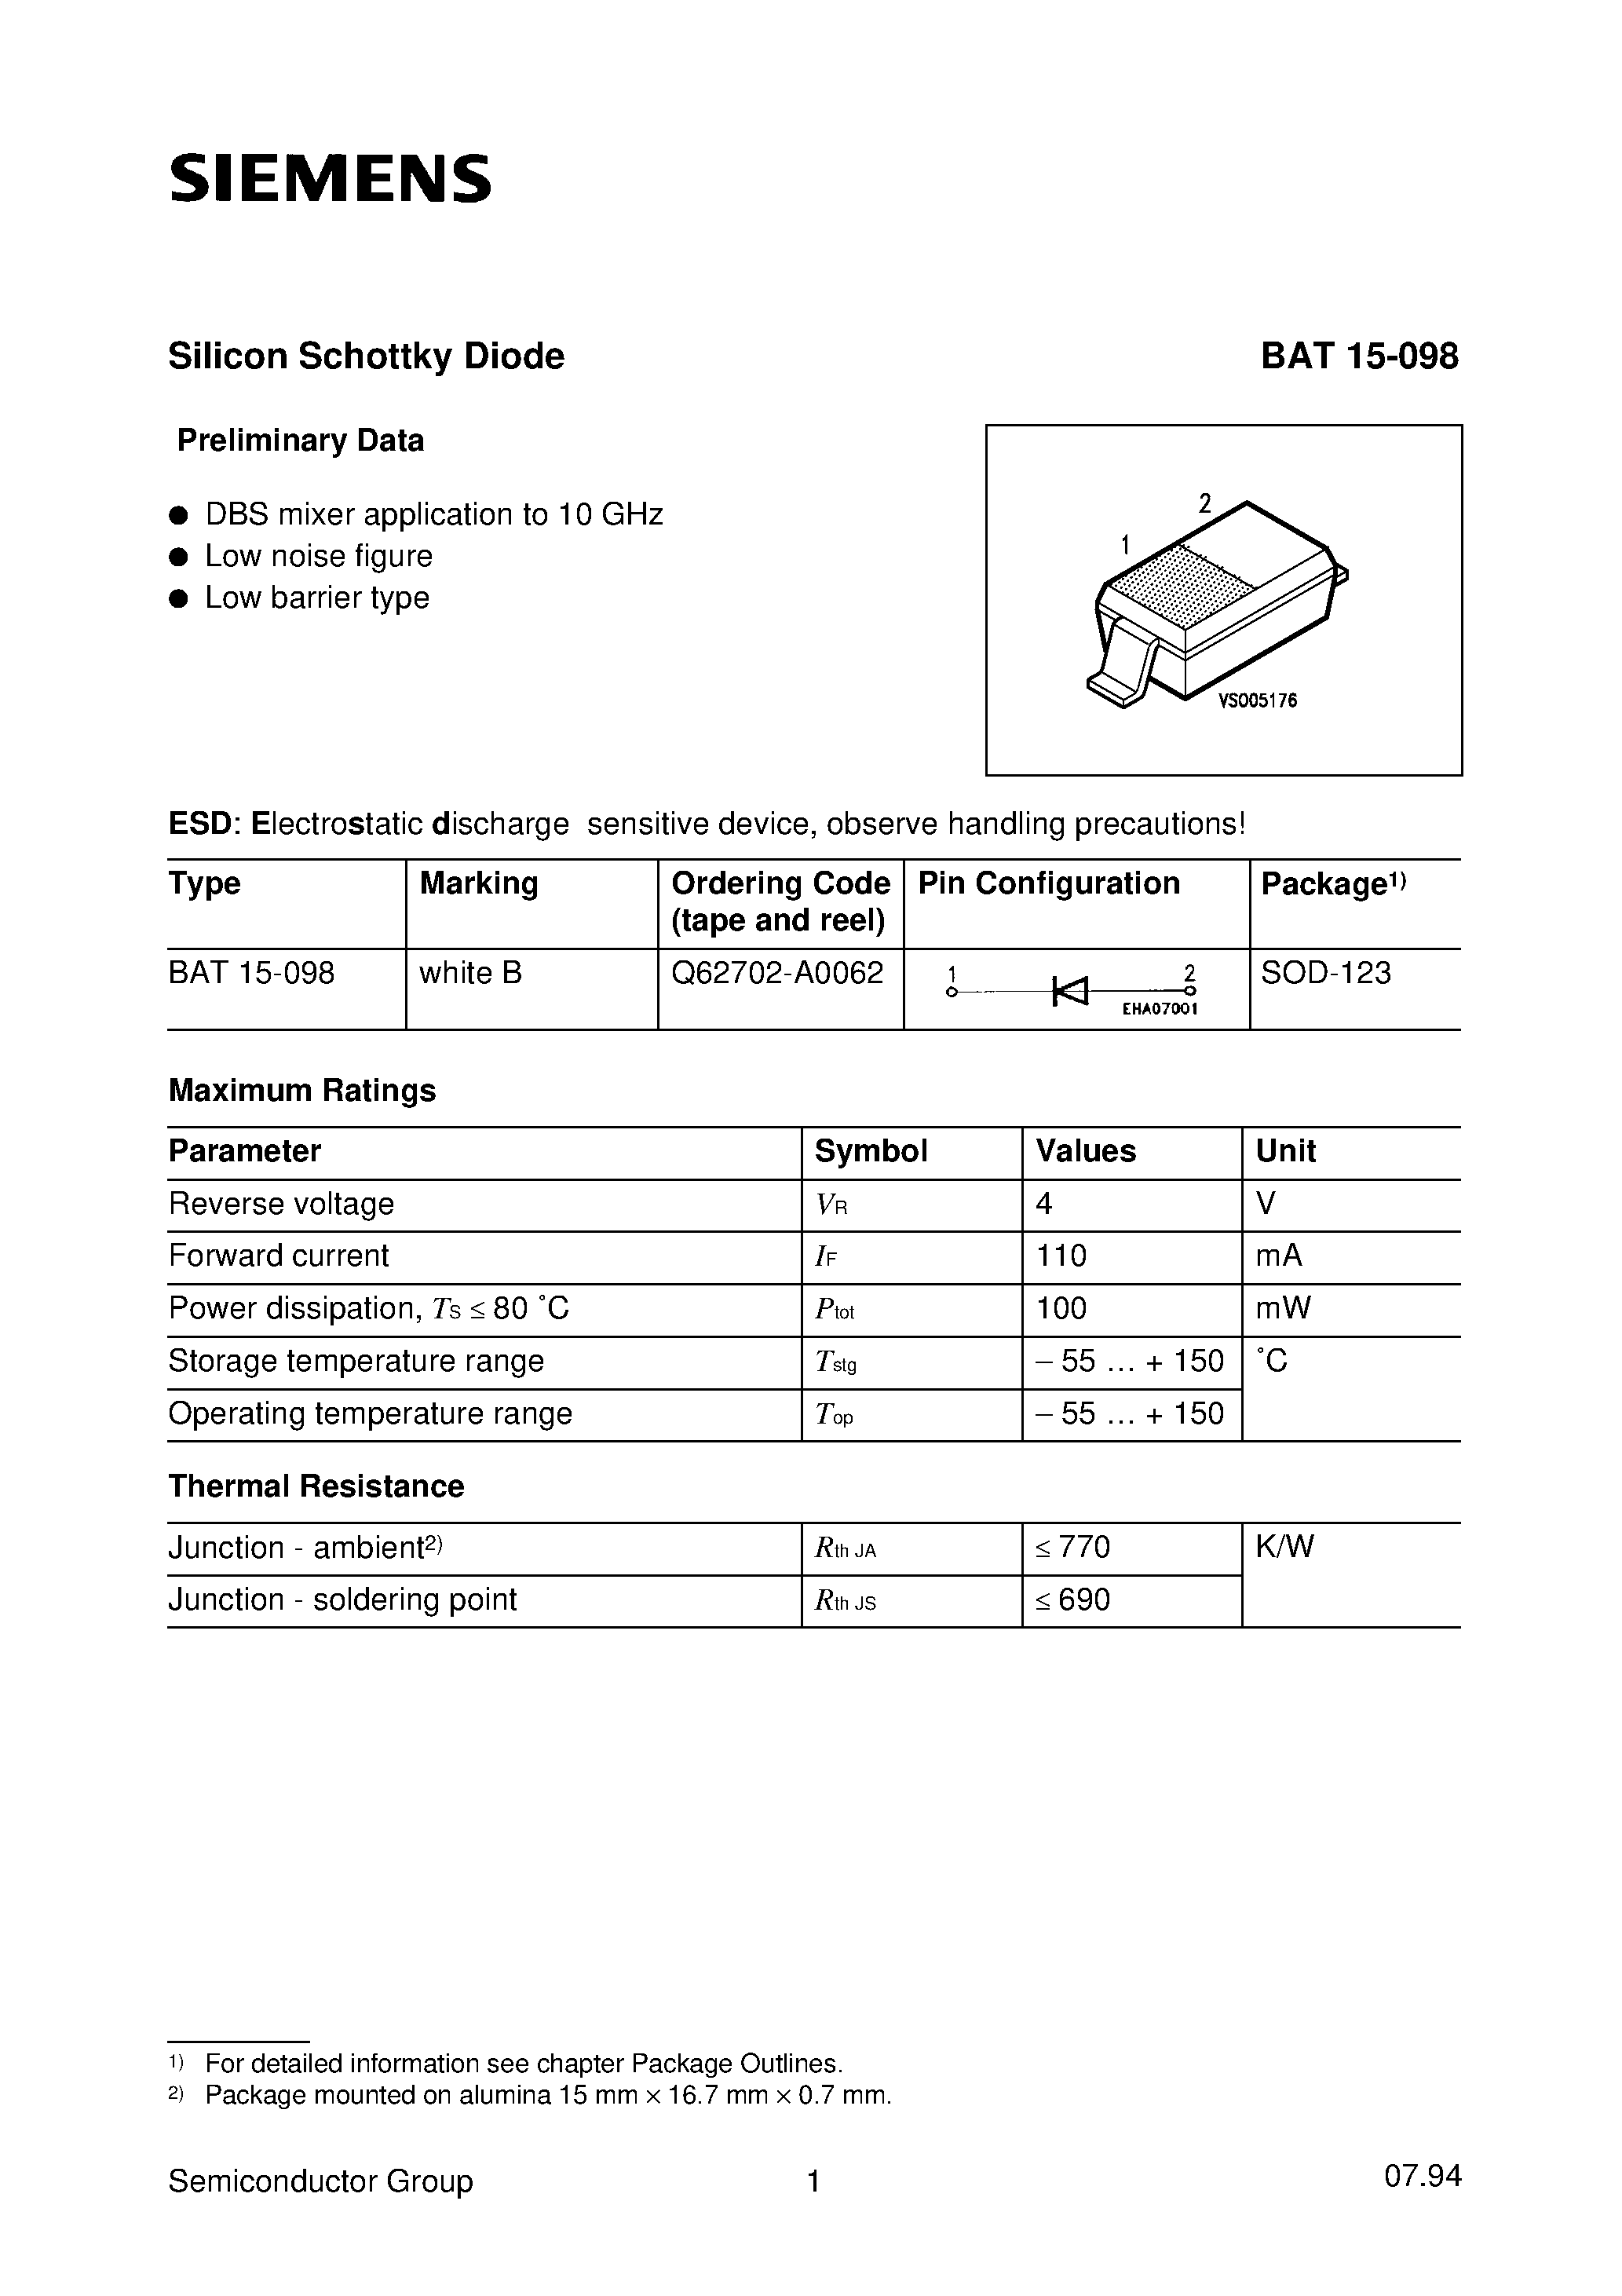 Даташит BAT15-098 - Silicon Schottky Diode (DBS mixer application to 10 GHz Low noise figure Low barrier type) страница 1